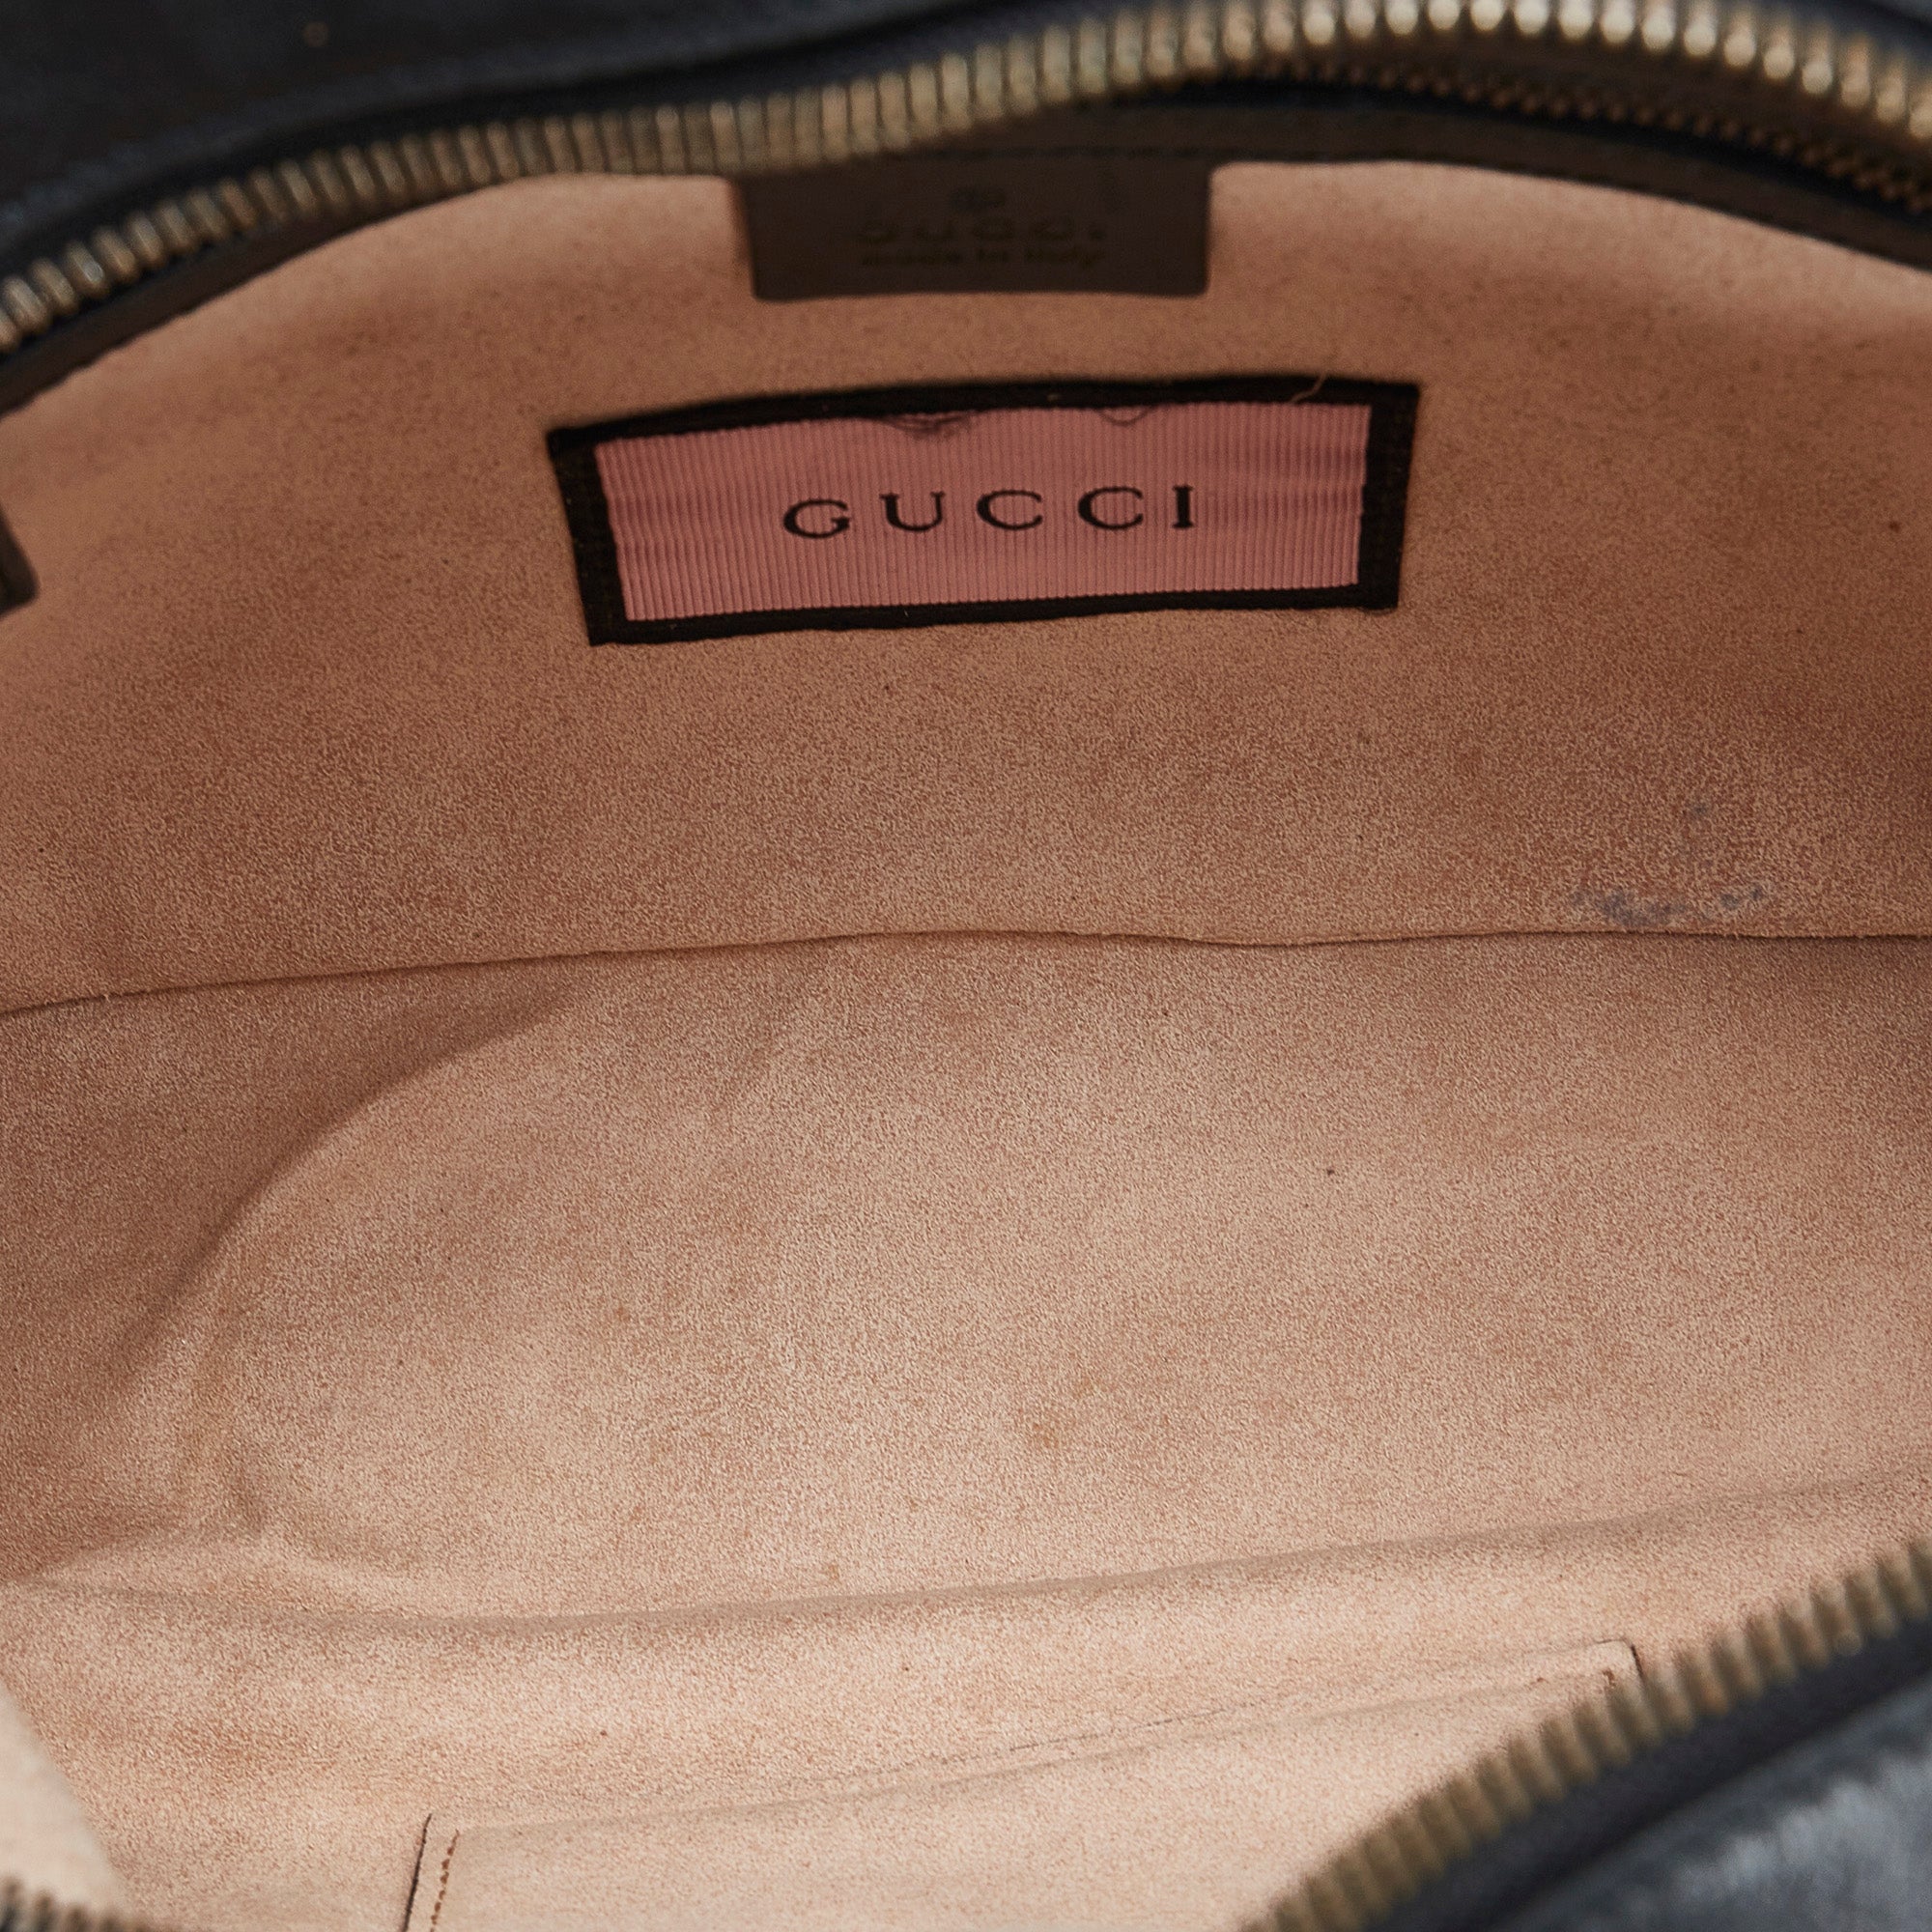 Gucci GG Marmont Ghost Black Printed Leather